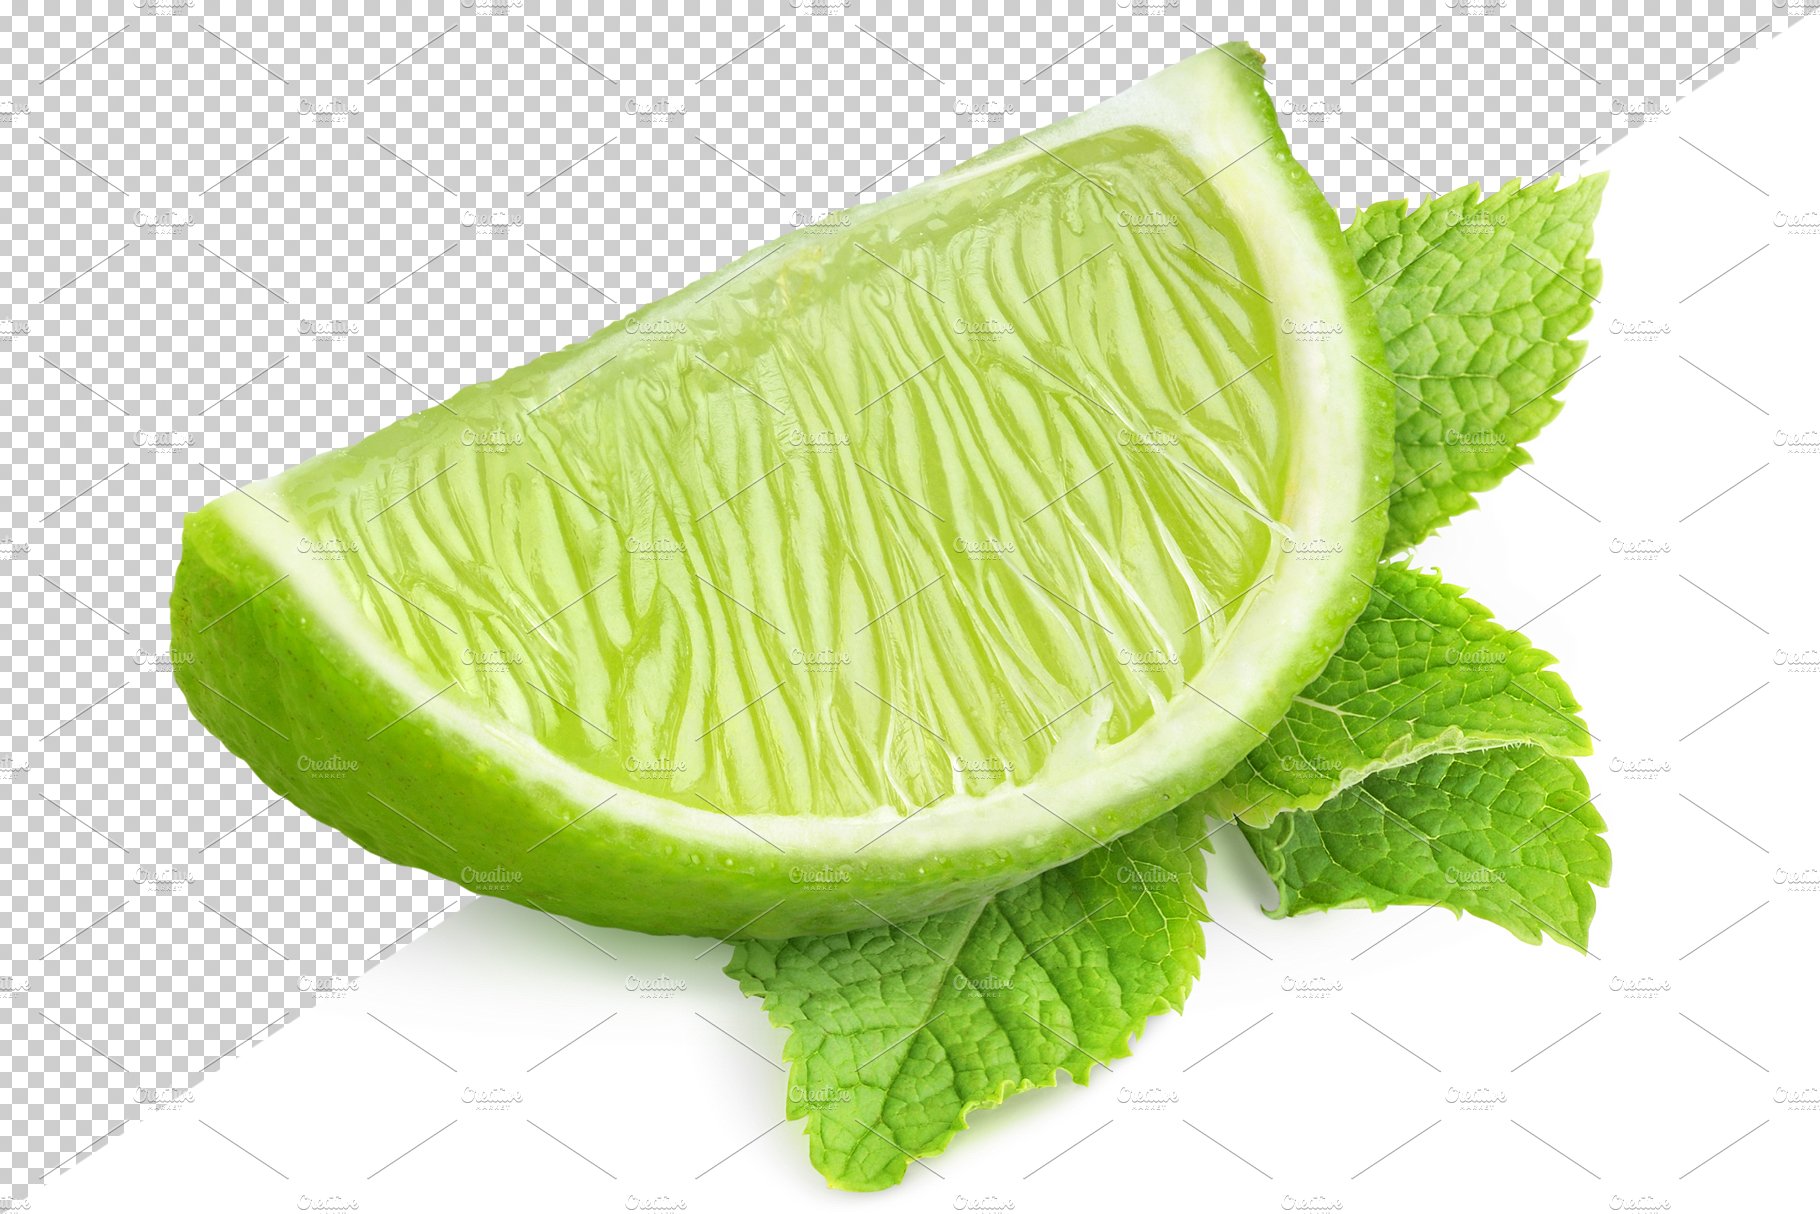 Lime and mint preview image.